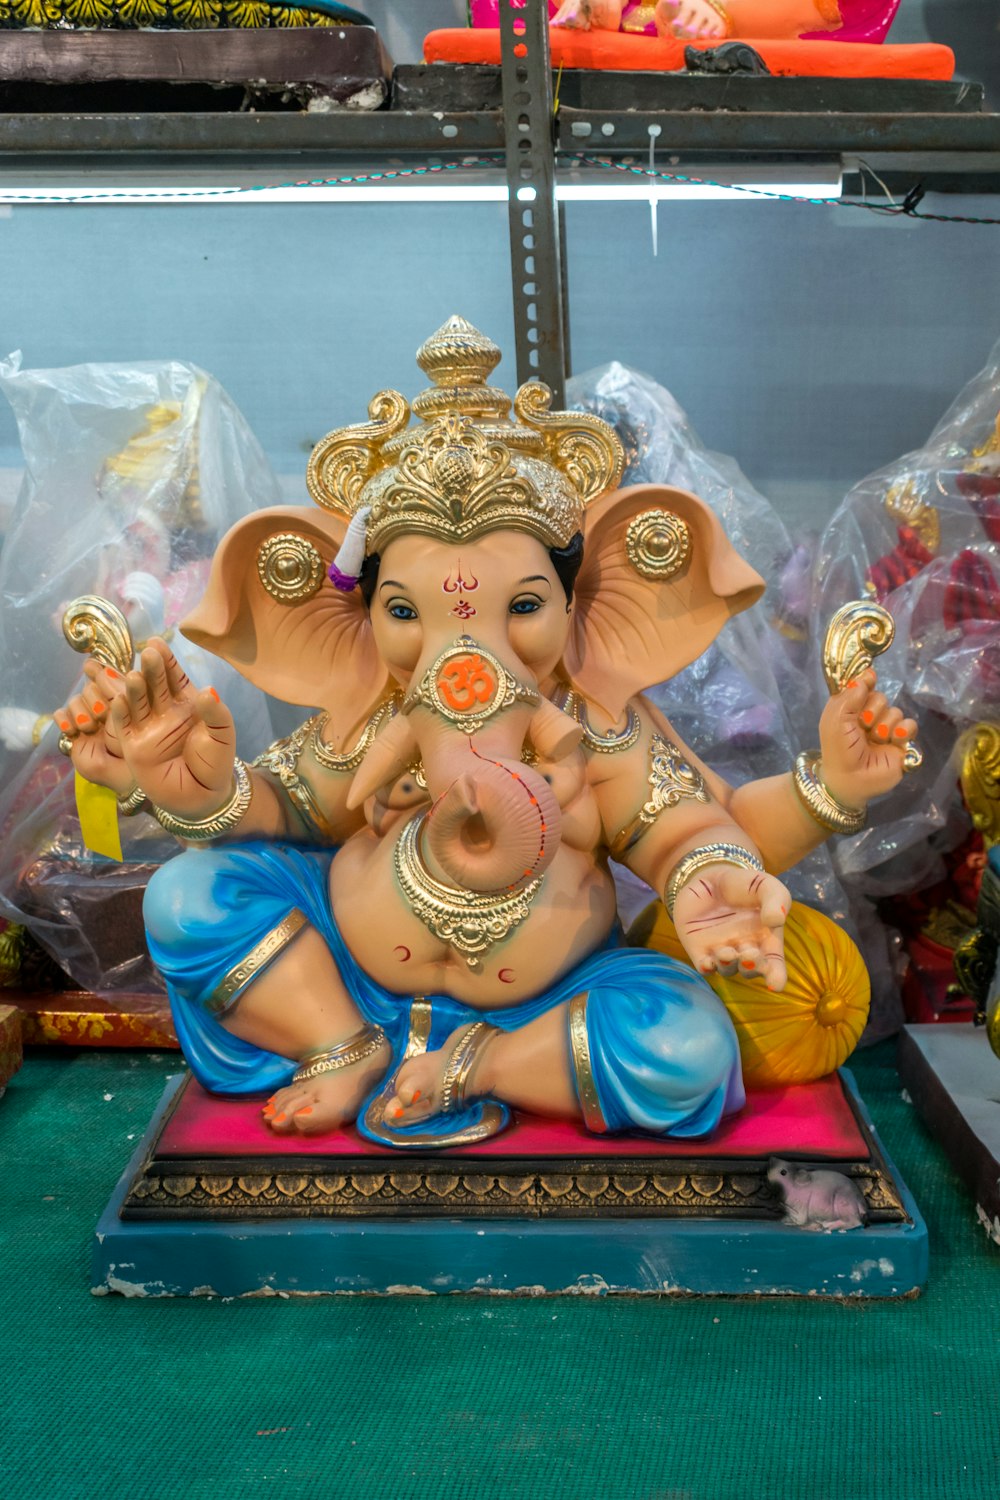 a statue of a ganesh sitting on a table